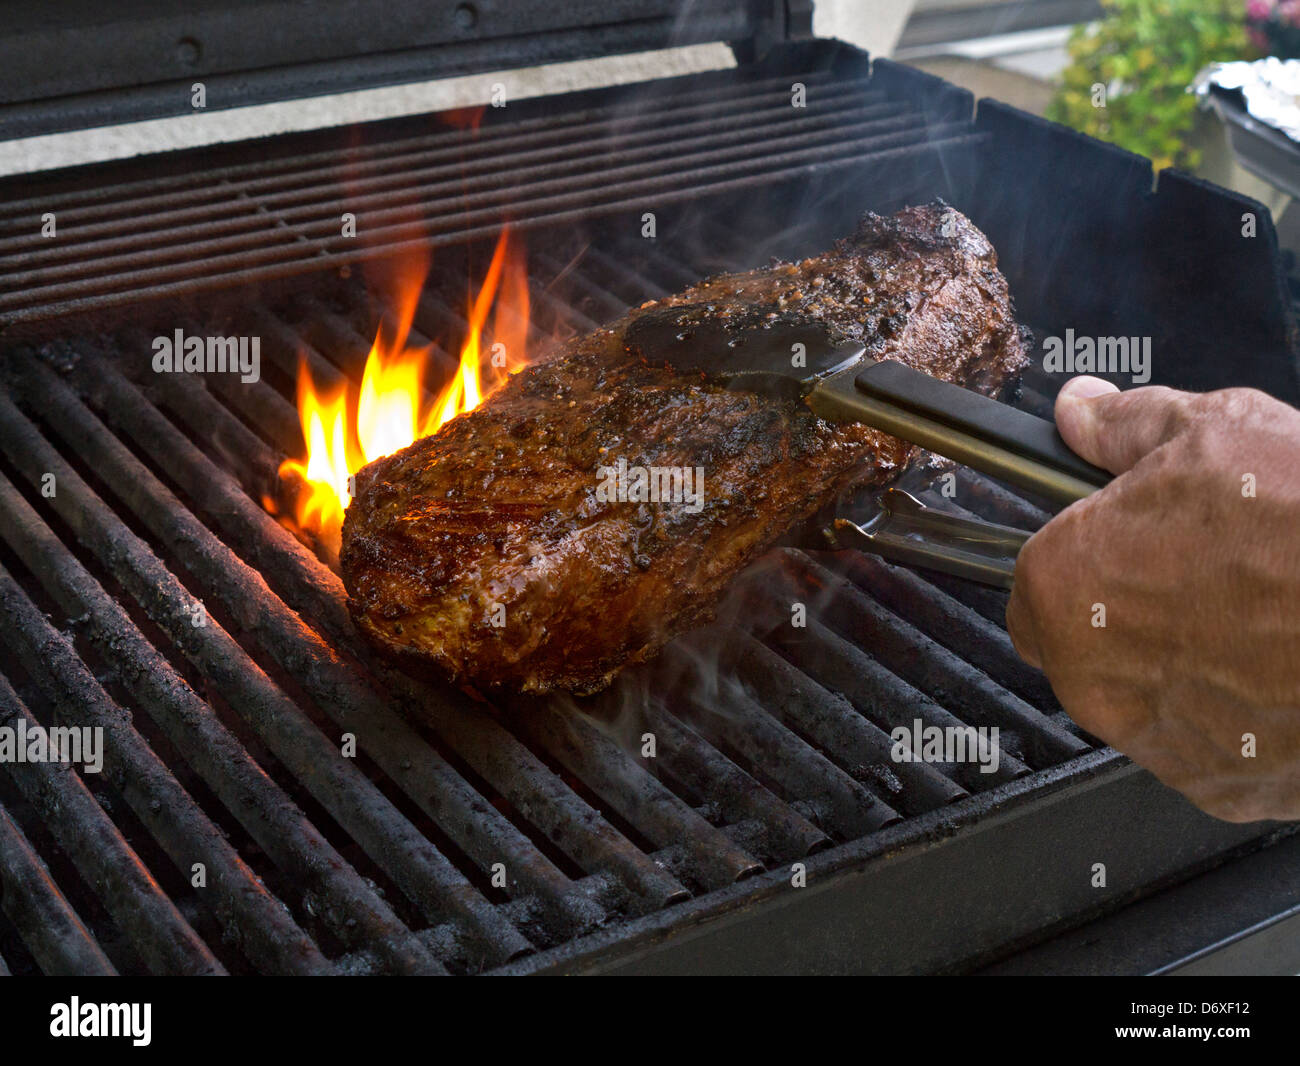 American cut sirloin of beef on Californian flame barbeque outdoors Stock Photo